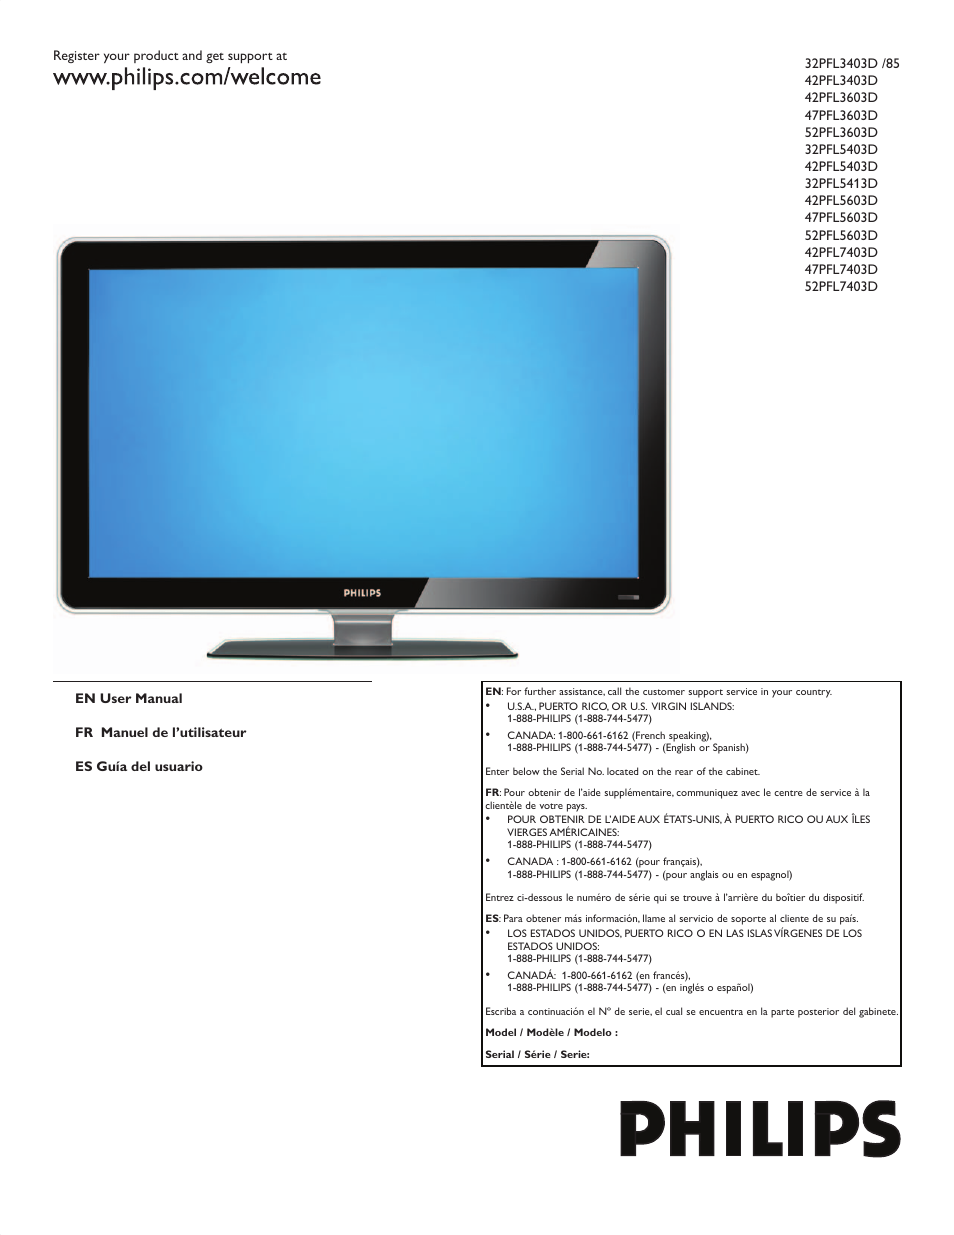 Philips 42PFL5603D-F7 User Manual | 44 pages | Original mode | Also for:  52PFL7403D-F7, 47PFL5603D-F7, 32PFL5403D-F7, LCD TV 42PFL7403D 107cm  42&quot; Full HD 1080p with Perfect Pixel HD Engine, 42PFL3603D-F7,  47PFL7403D-F7, 52PFL5603D-F7